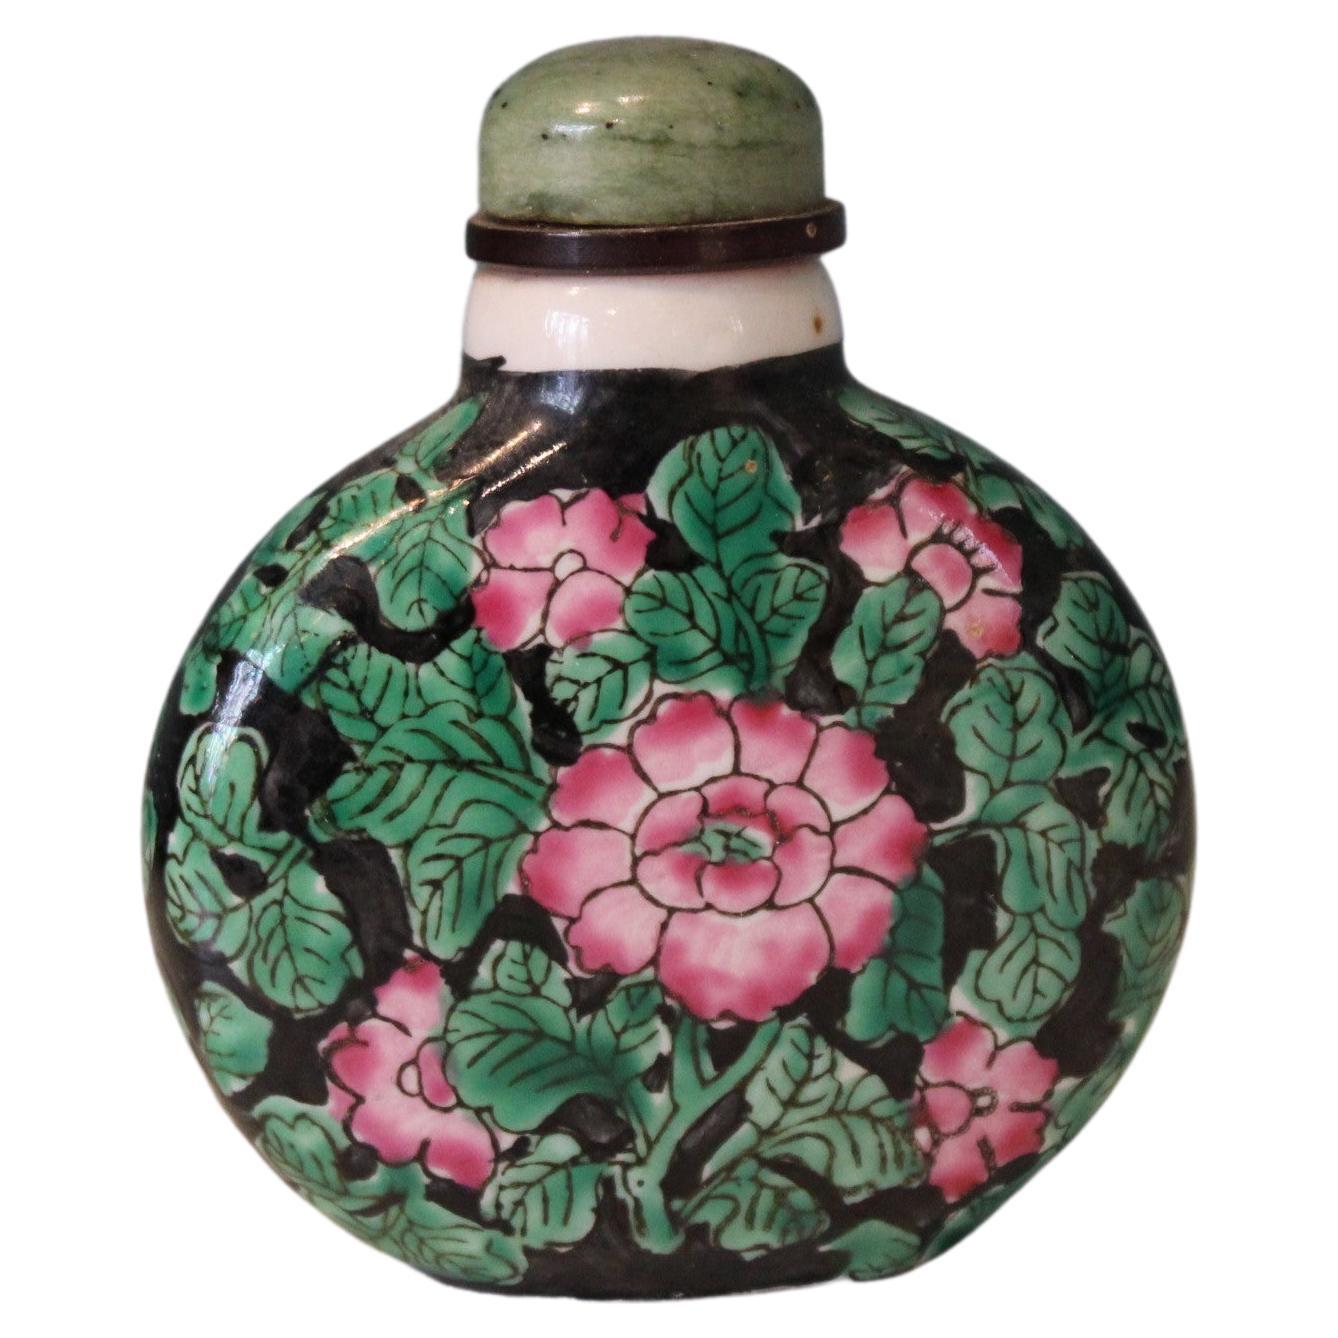 Porcelain Chinese Snuff Bottle For Sale